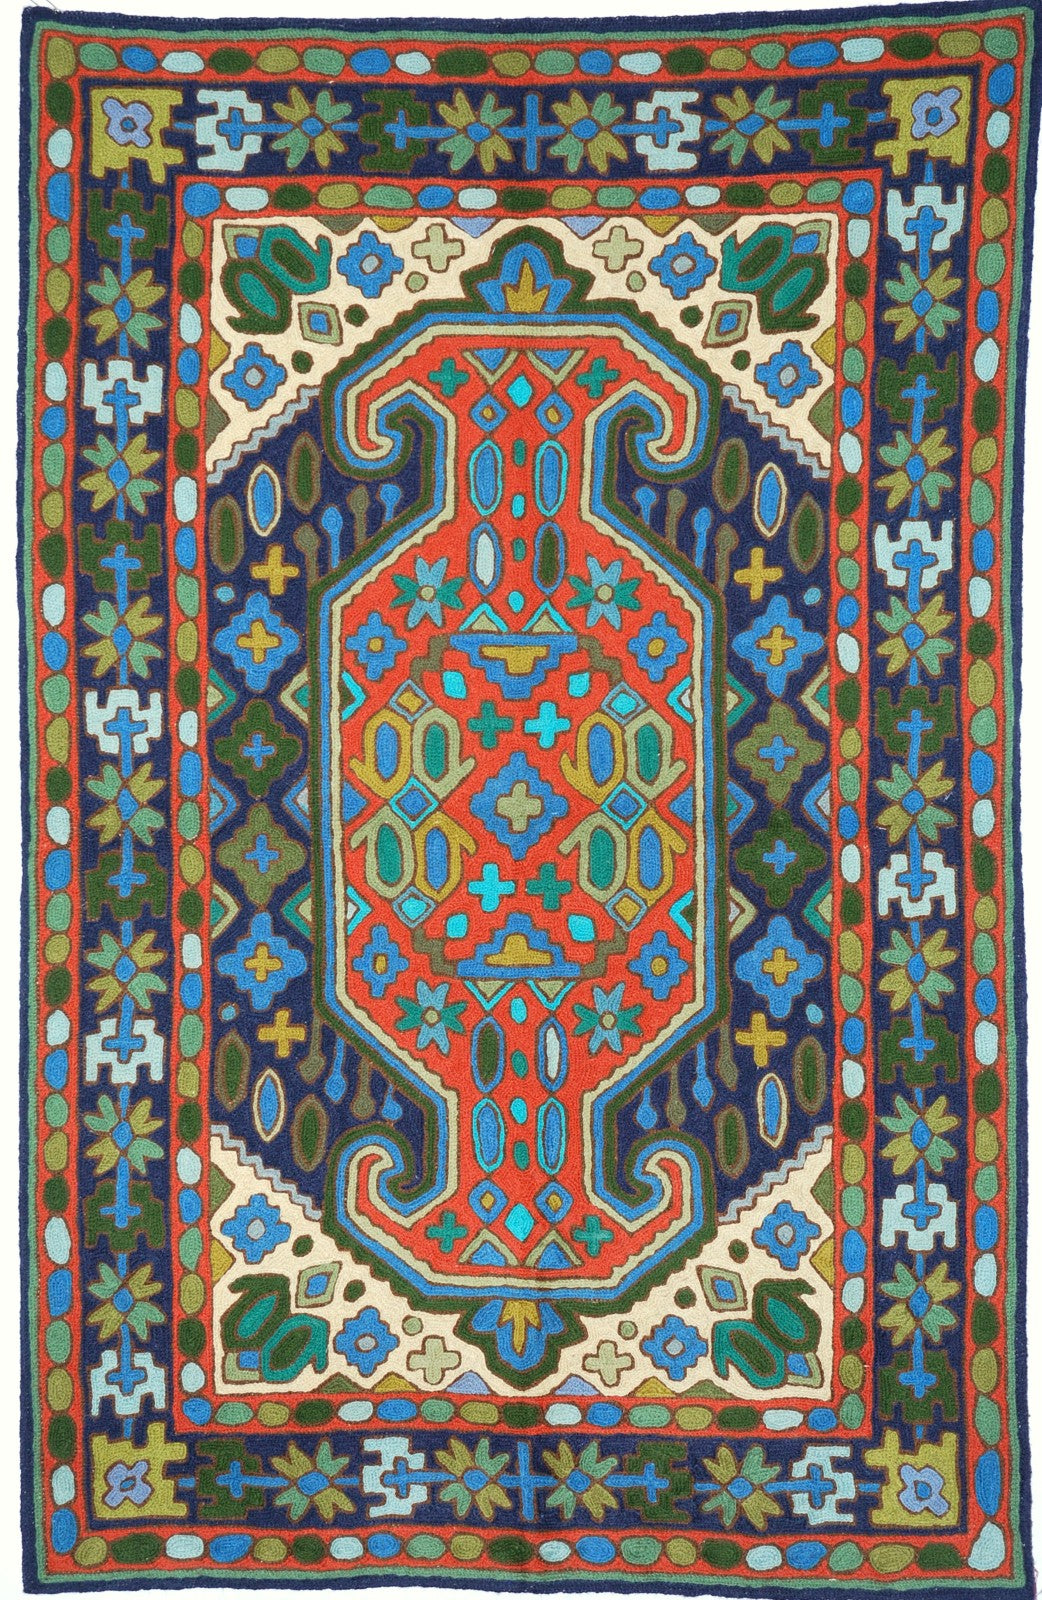 ChainStitch Tapestry Kilim Woolen Area Rug, Multicolor Embroidery